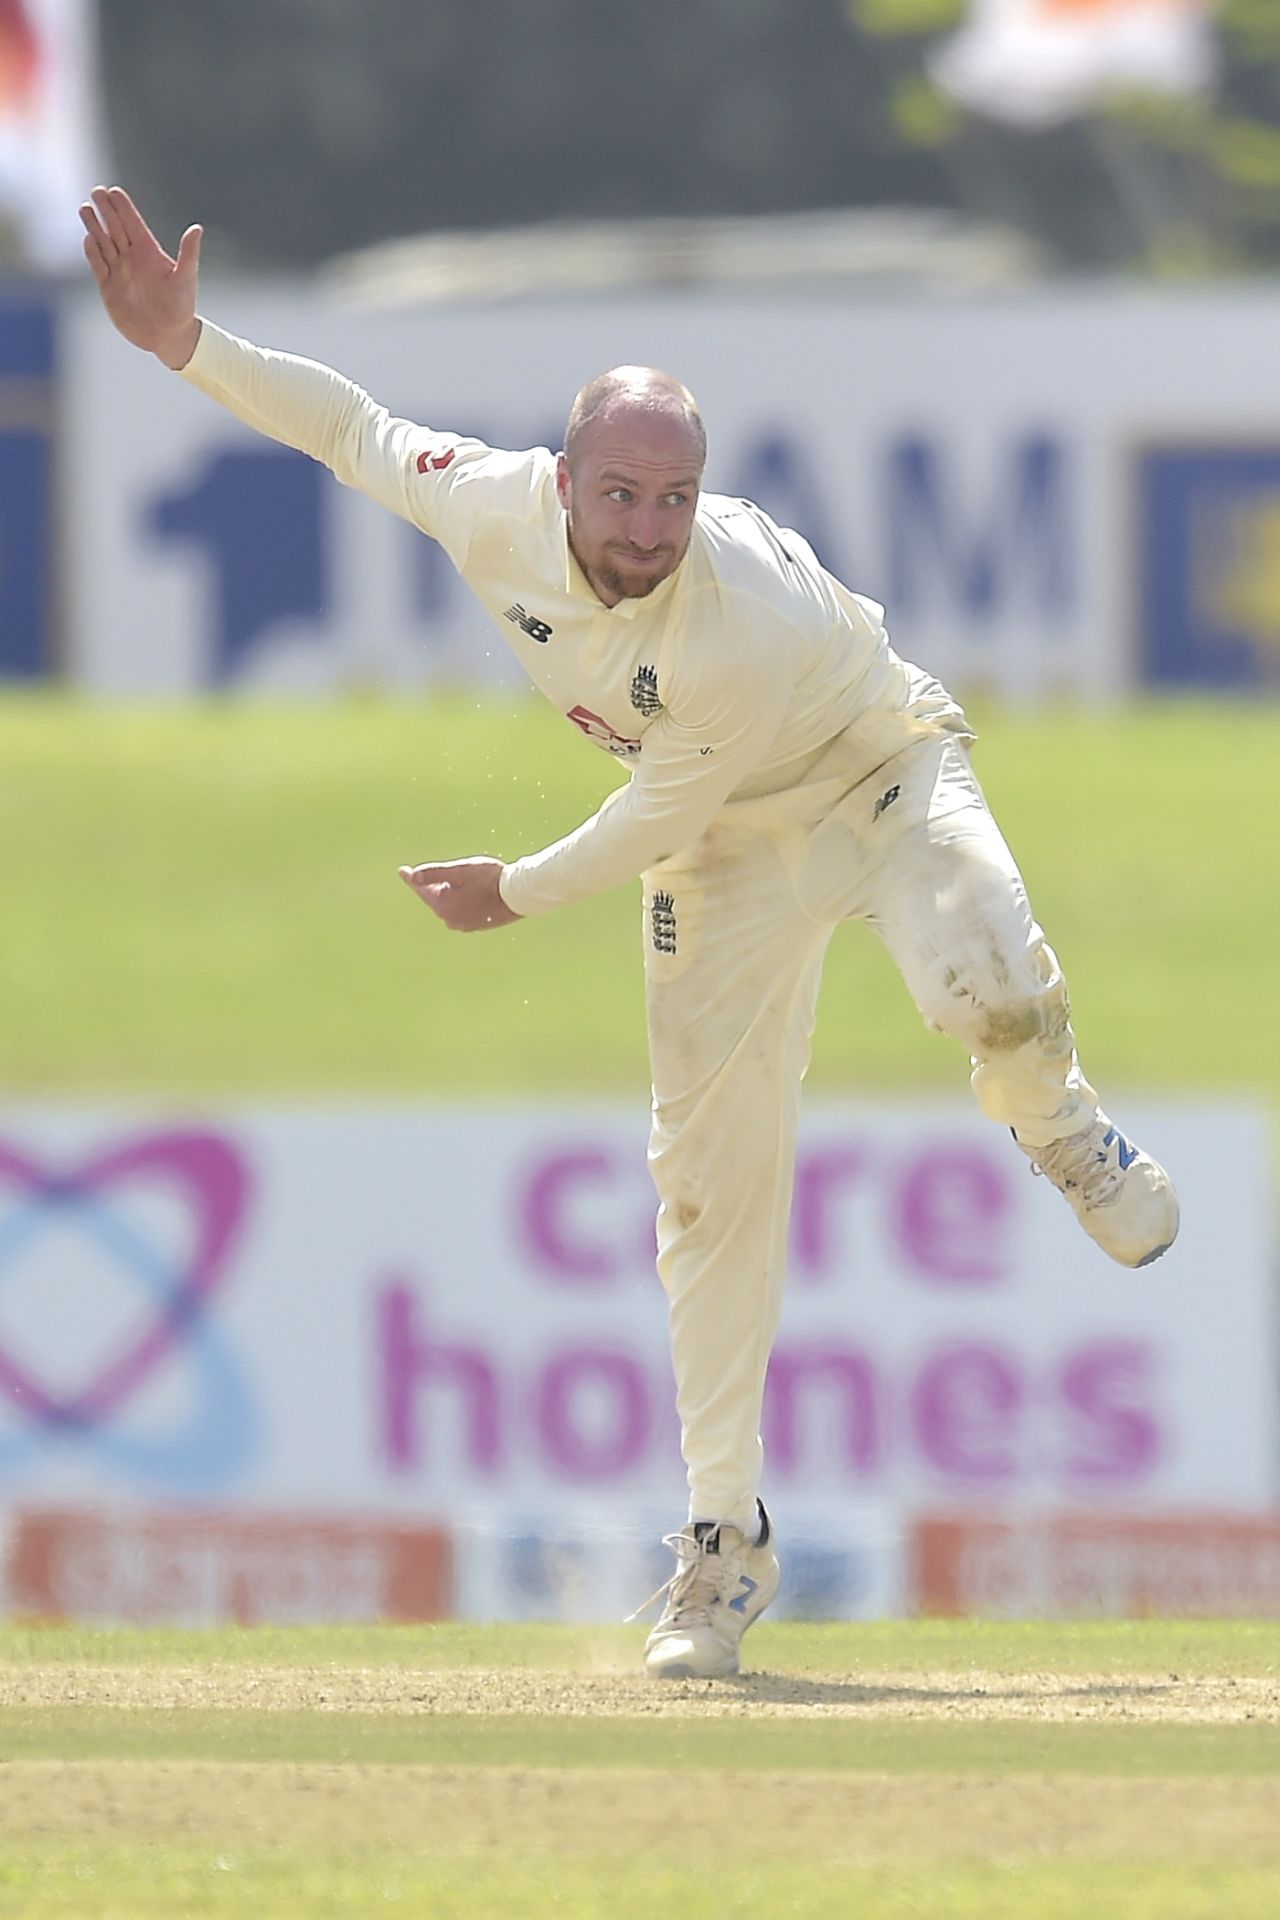 Jack Leach didn't find much purchase from the Galle pitch, Sri Lanka vs England, 2nd Test, Galle, 1st day, January 22, 2021